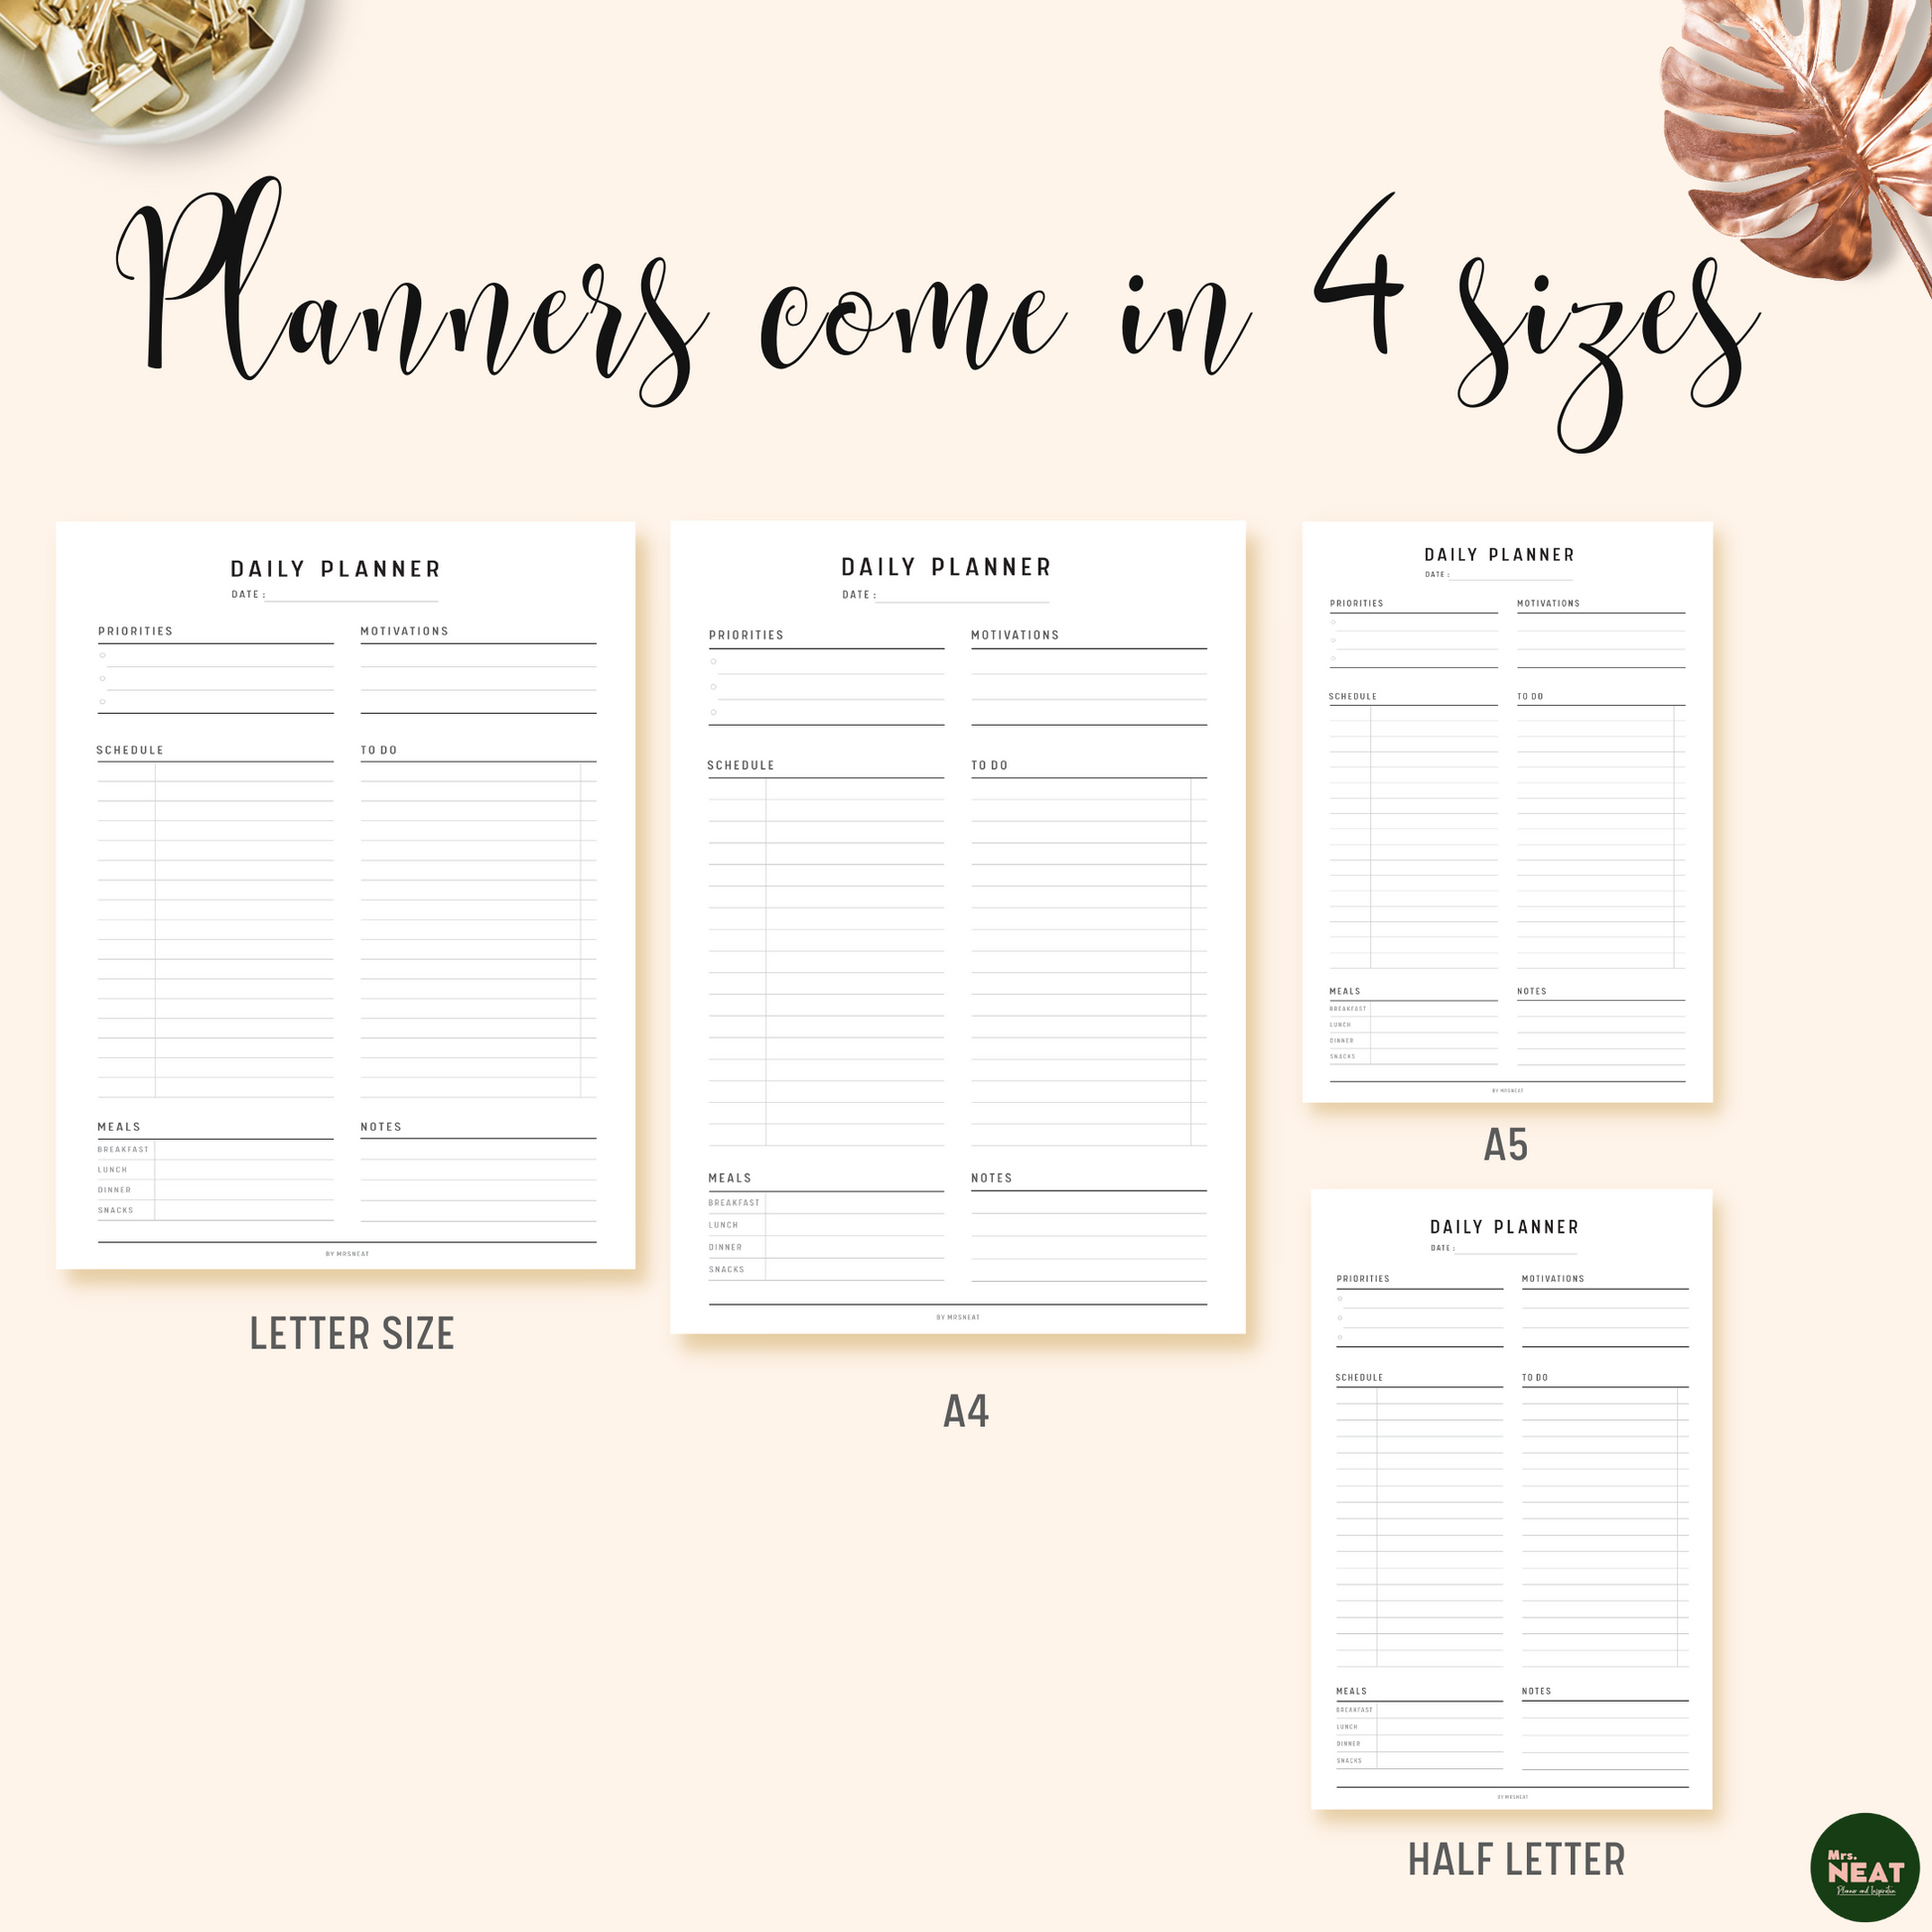 Weekly Planner Printable A5 and Half Letter Size